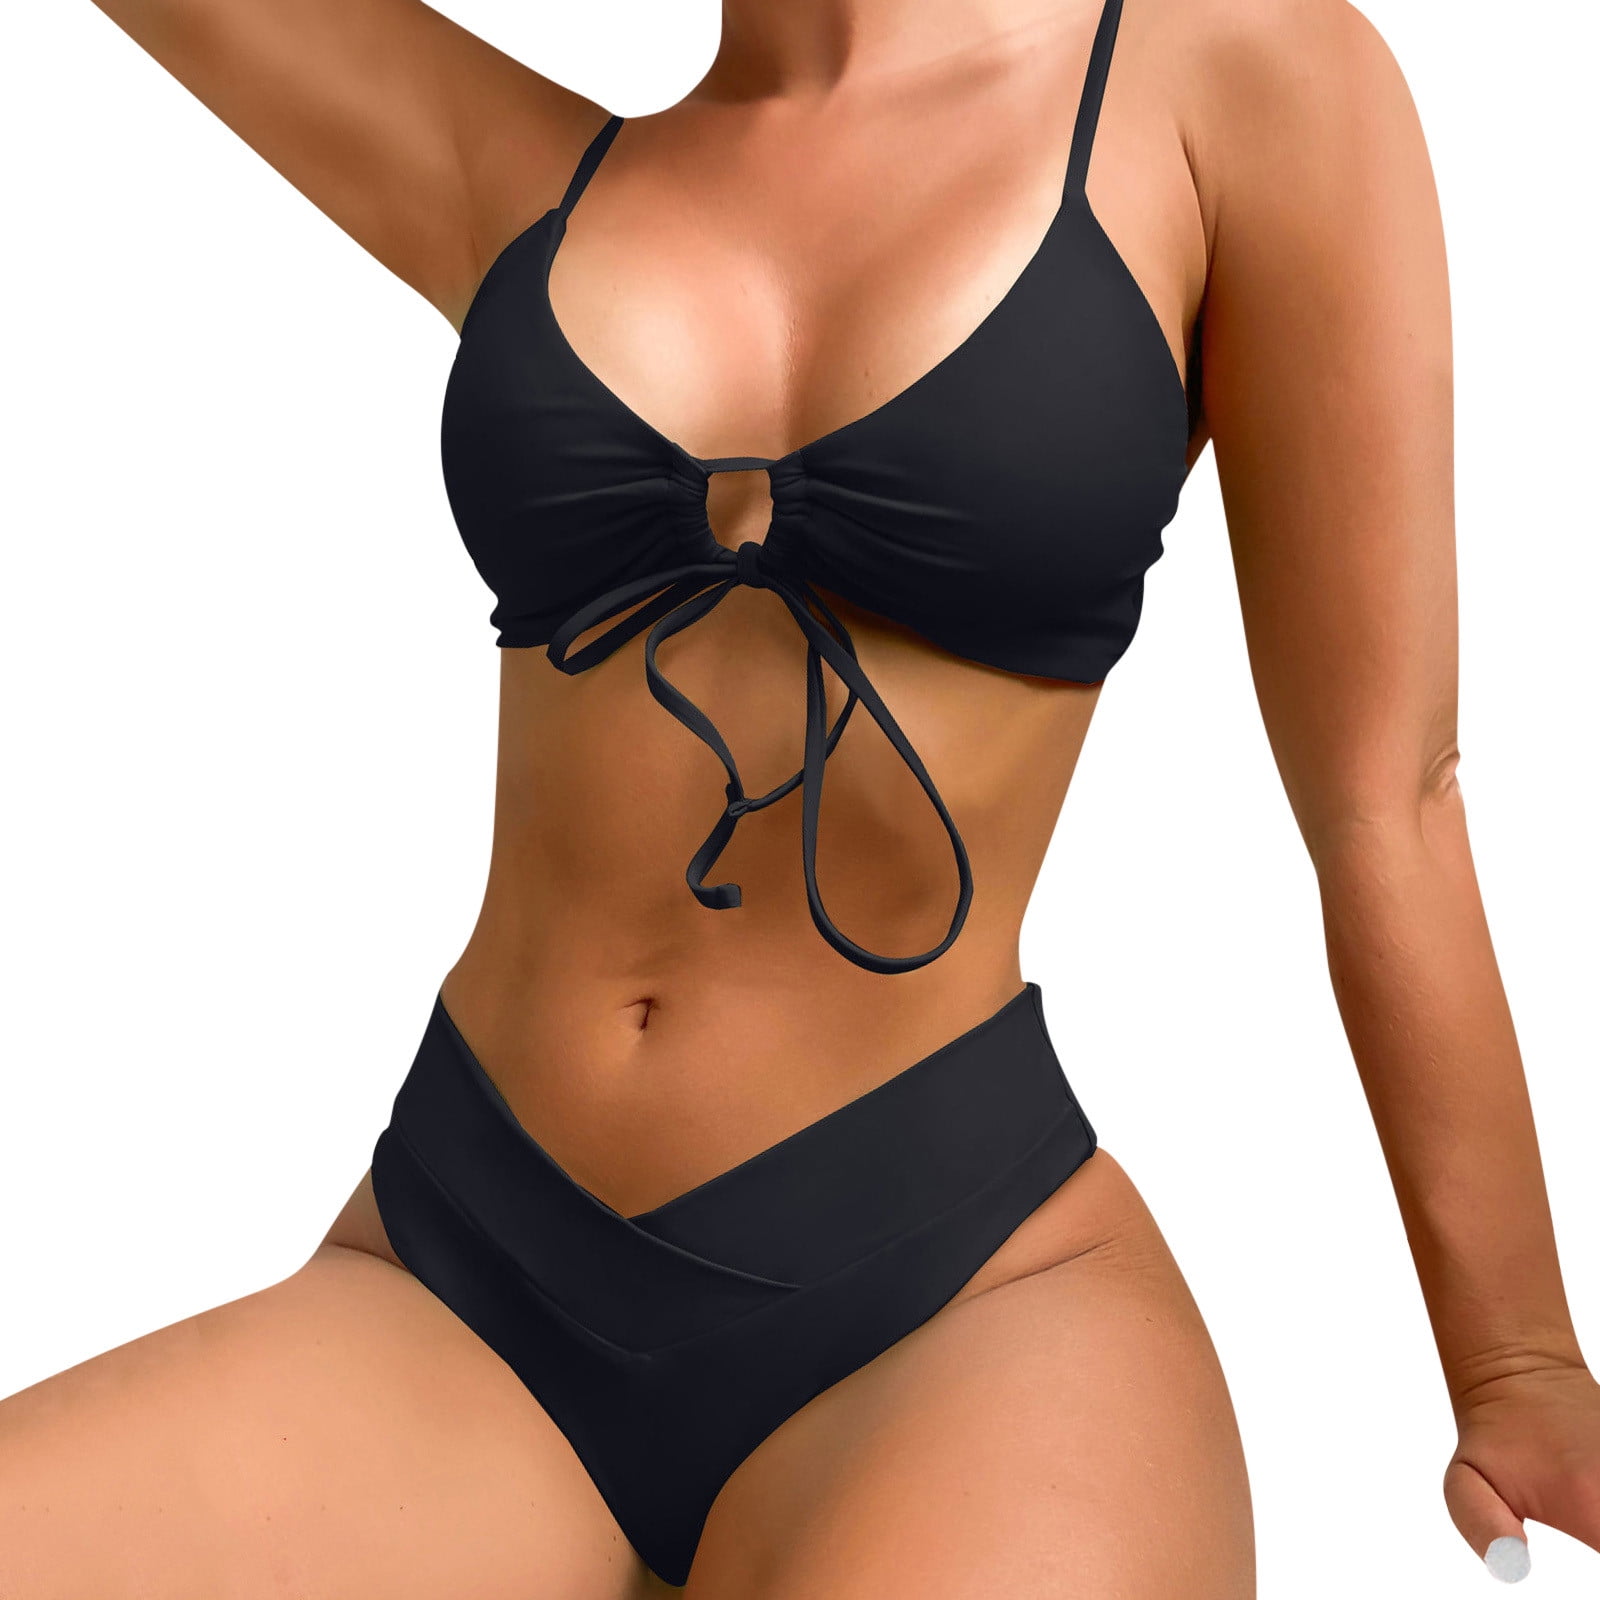 nsendm Female Underwear Adult Teens Swimsuits for Girls Women's High  Waisted Golden Bikini Sets Two Piece Swimsuit Back Tie Knot Bathing Suits(Black,  M) 